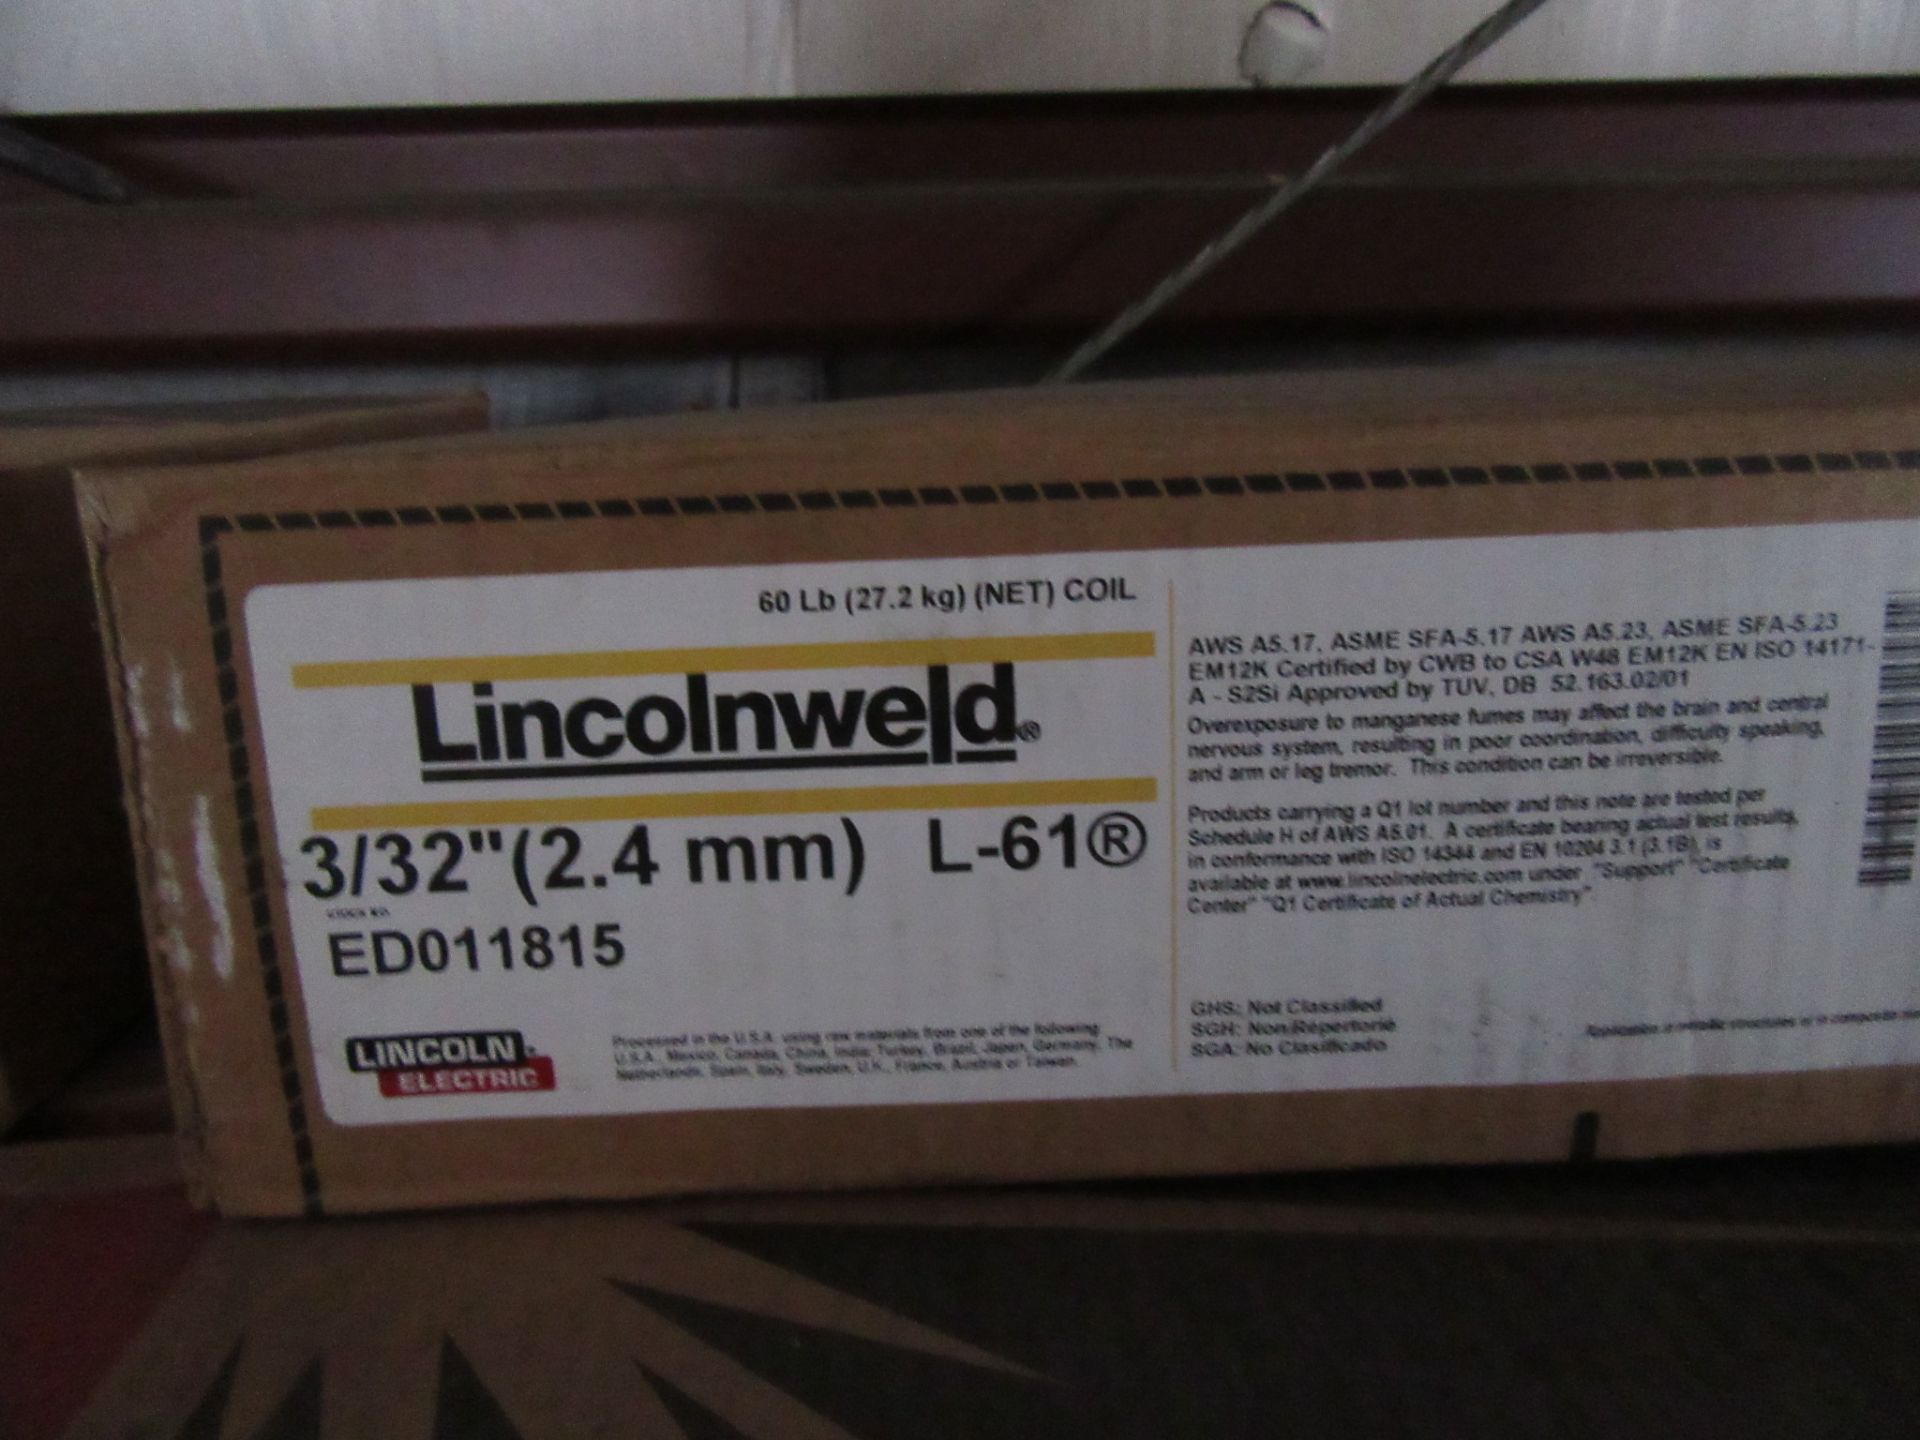 LOT (38) SPOOLS 3/32'' LINCOLN L-61 ARC WELDING WIRE, STOCK NO. ED011815, (BACK BUILDING) - Image 2 of 2